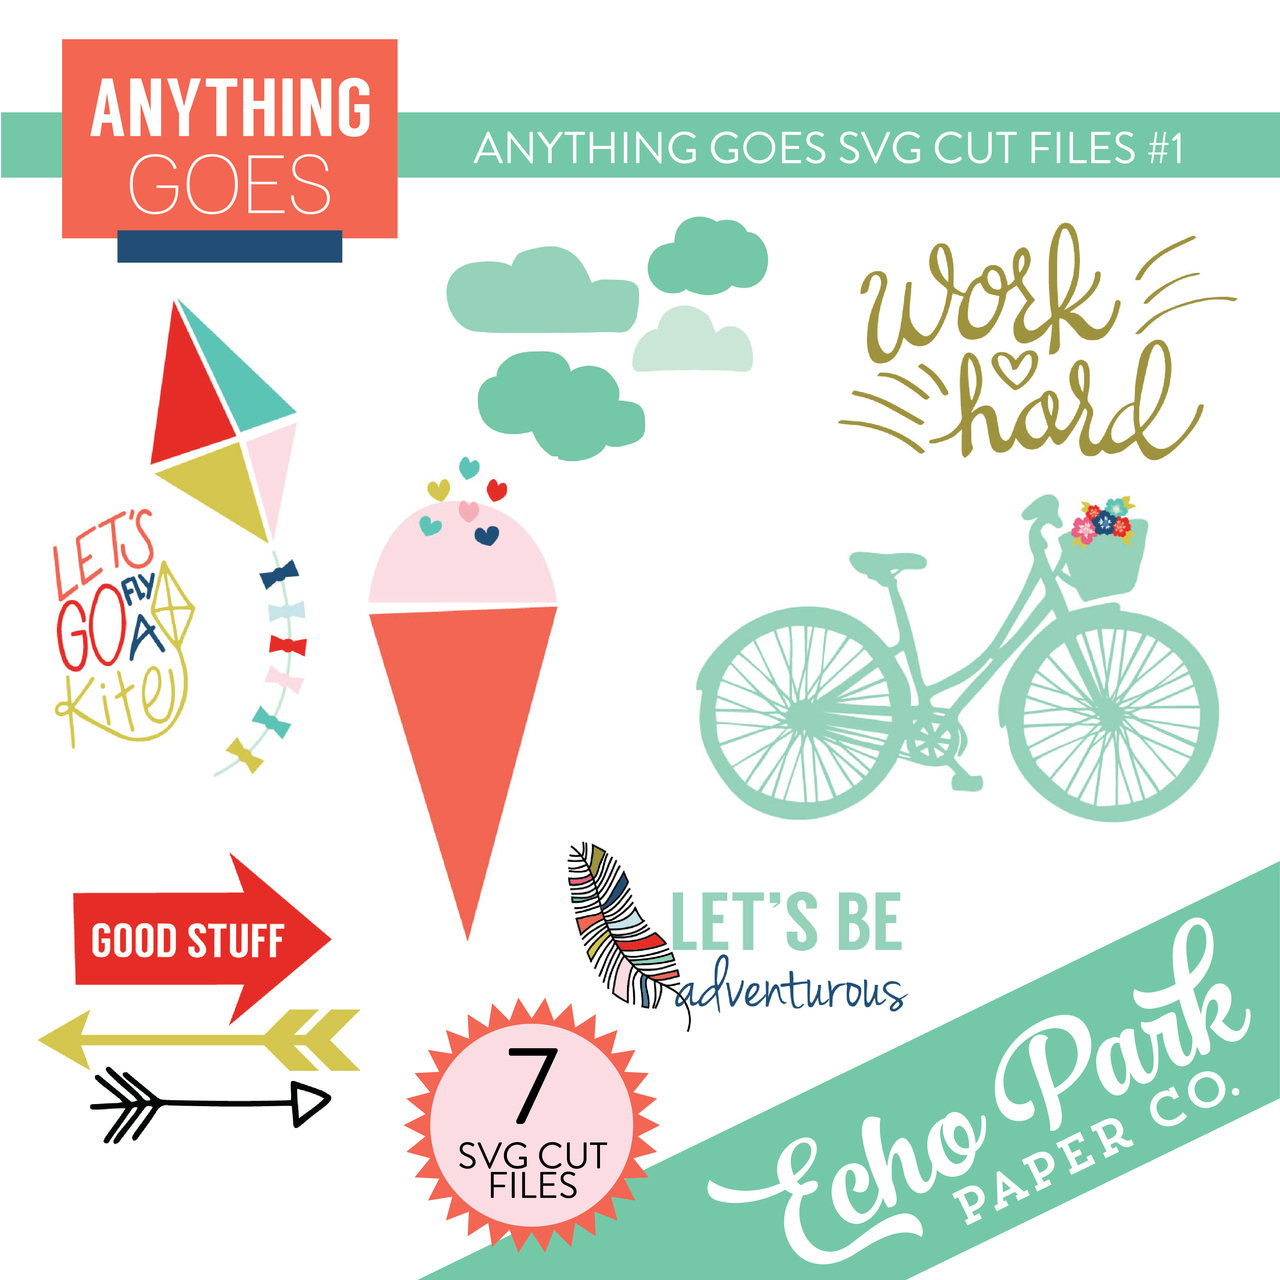 Anything Goes SVG Cut Files #1